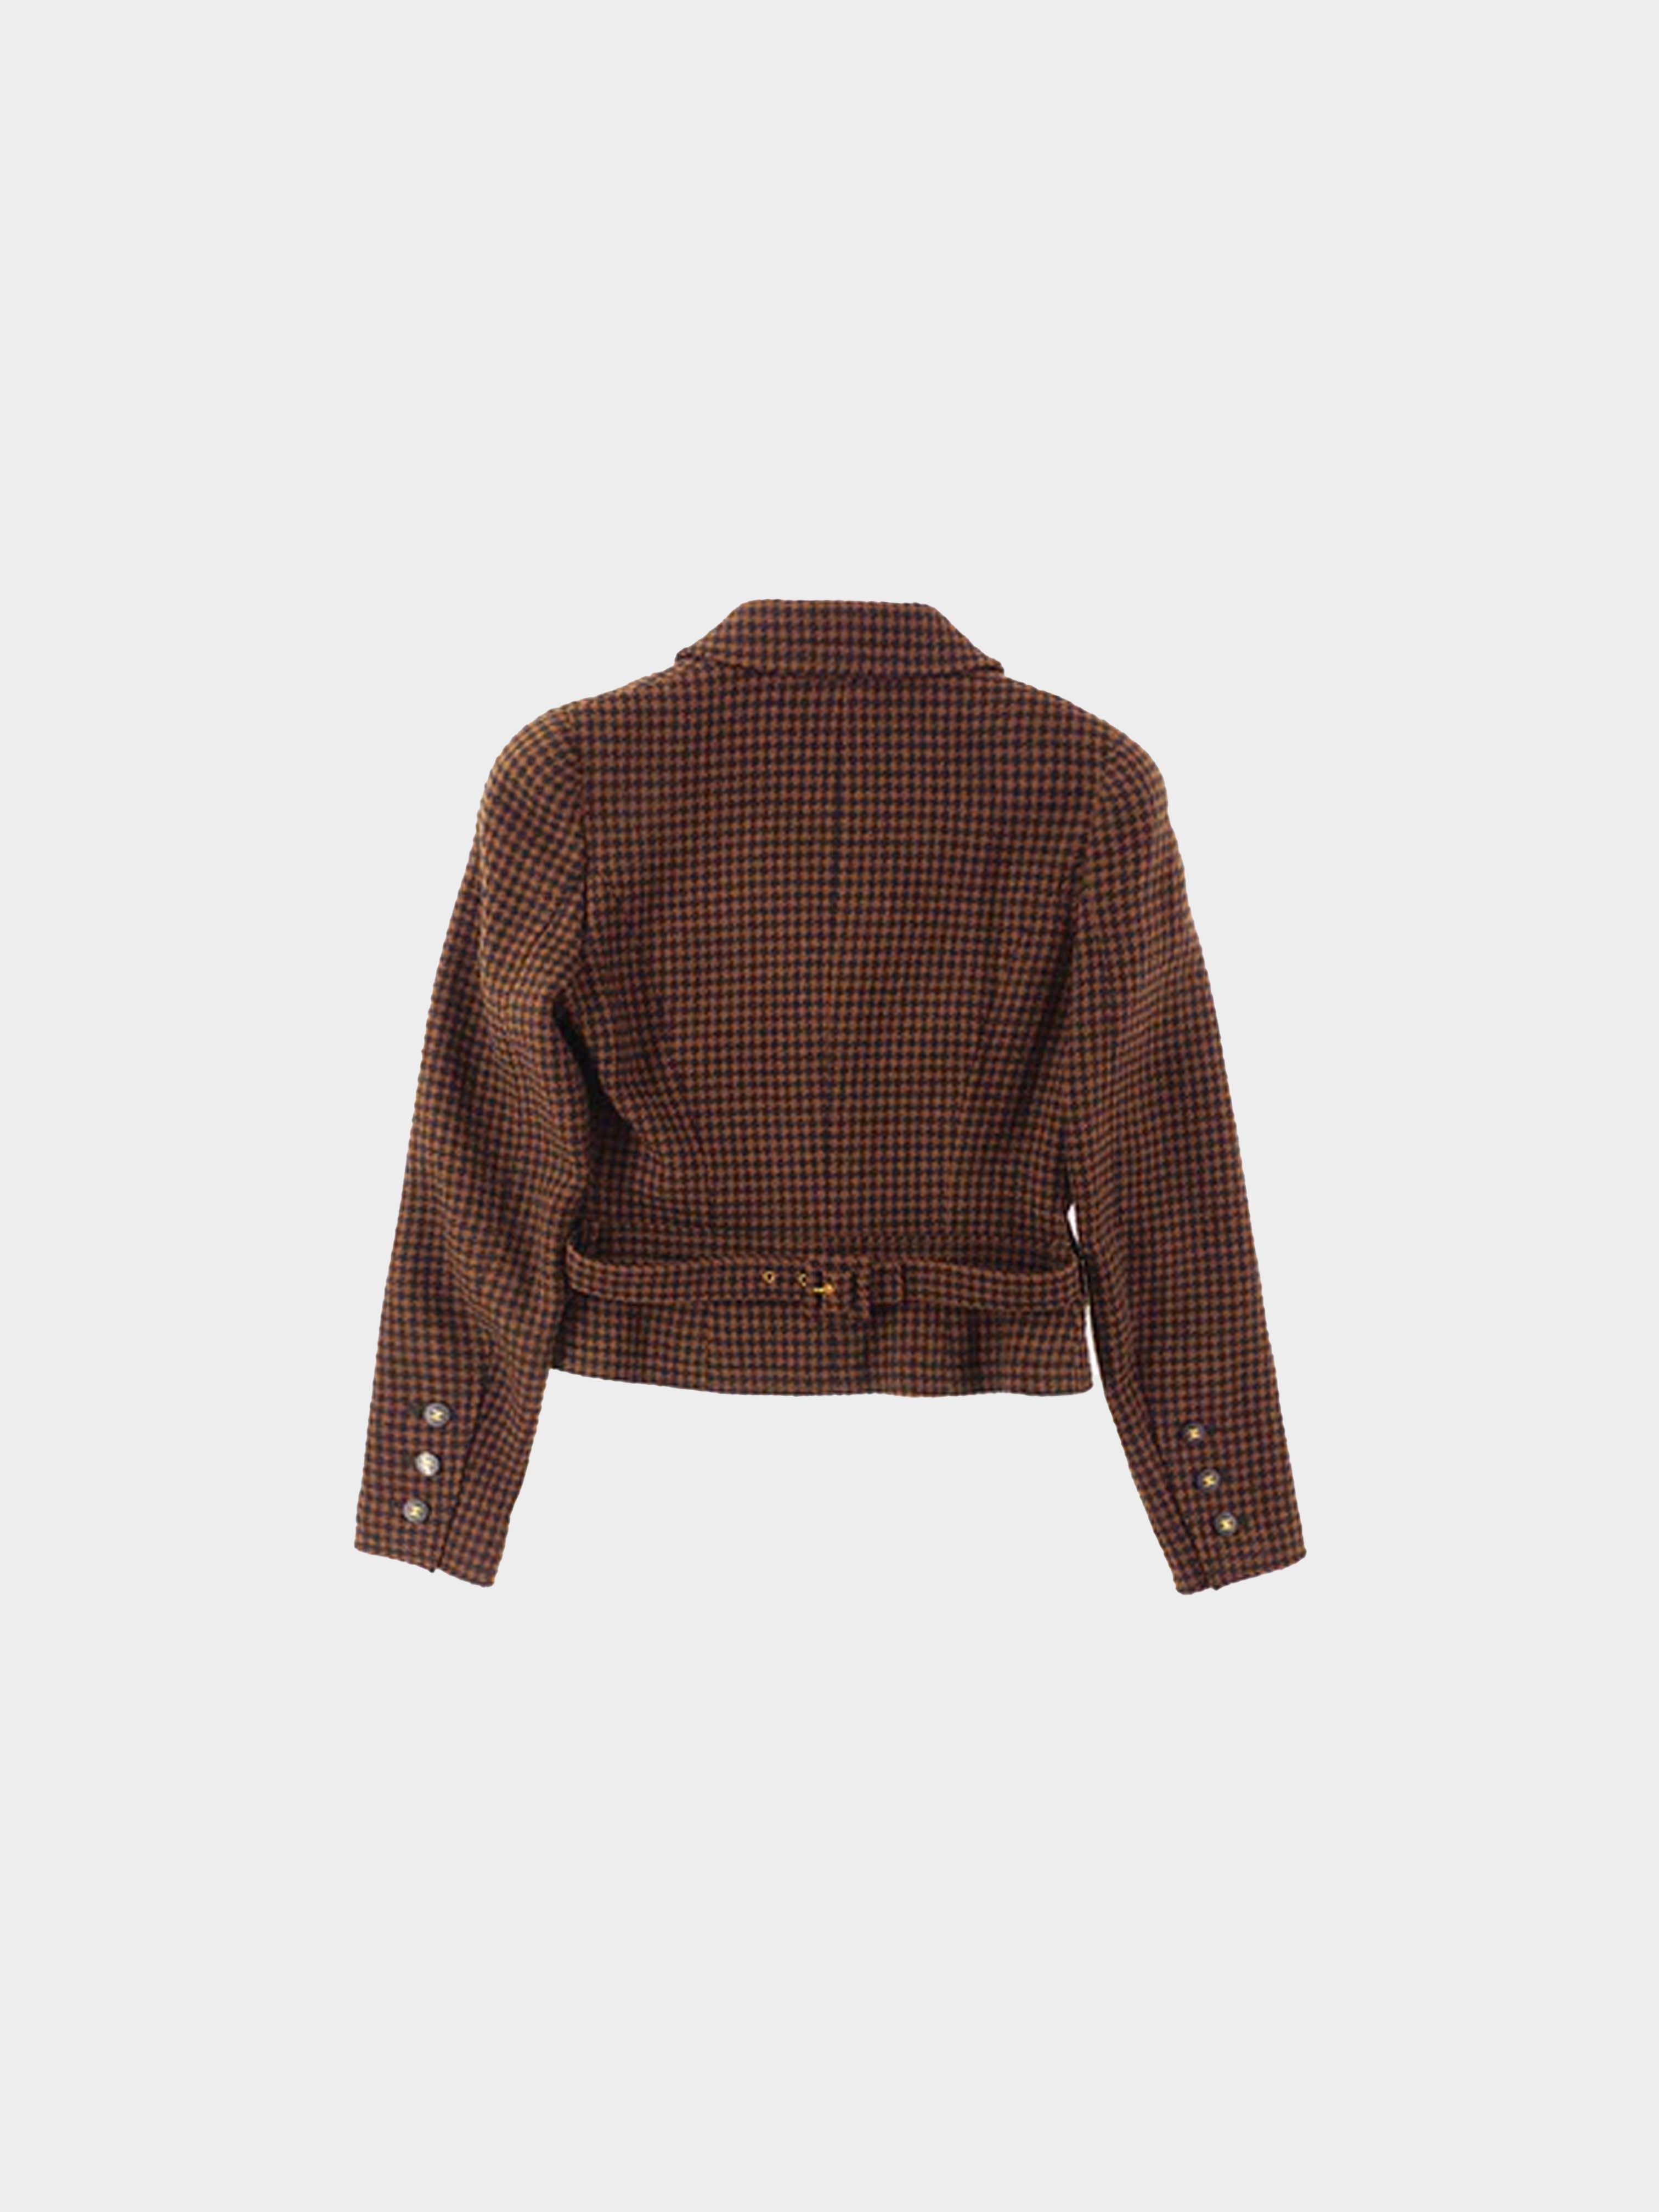 Chanel AW 1997 Brown Tweed Jacket